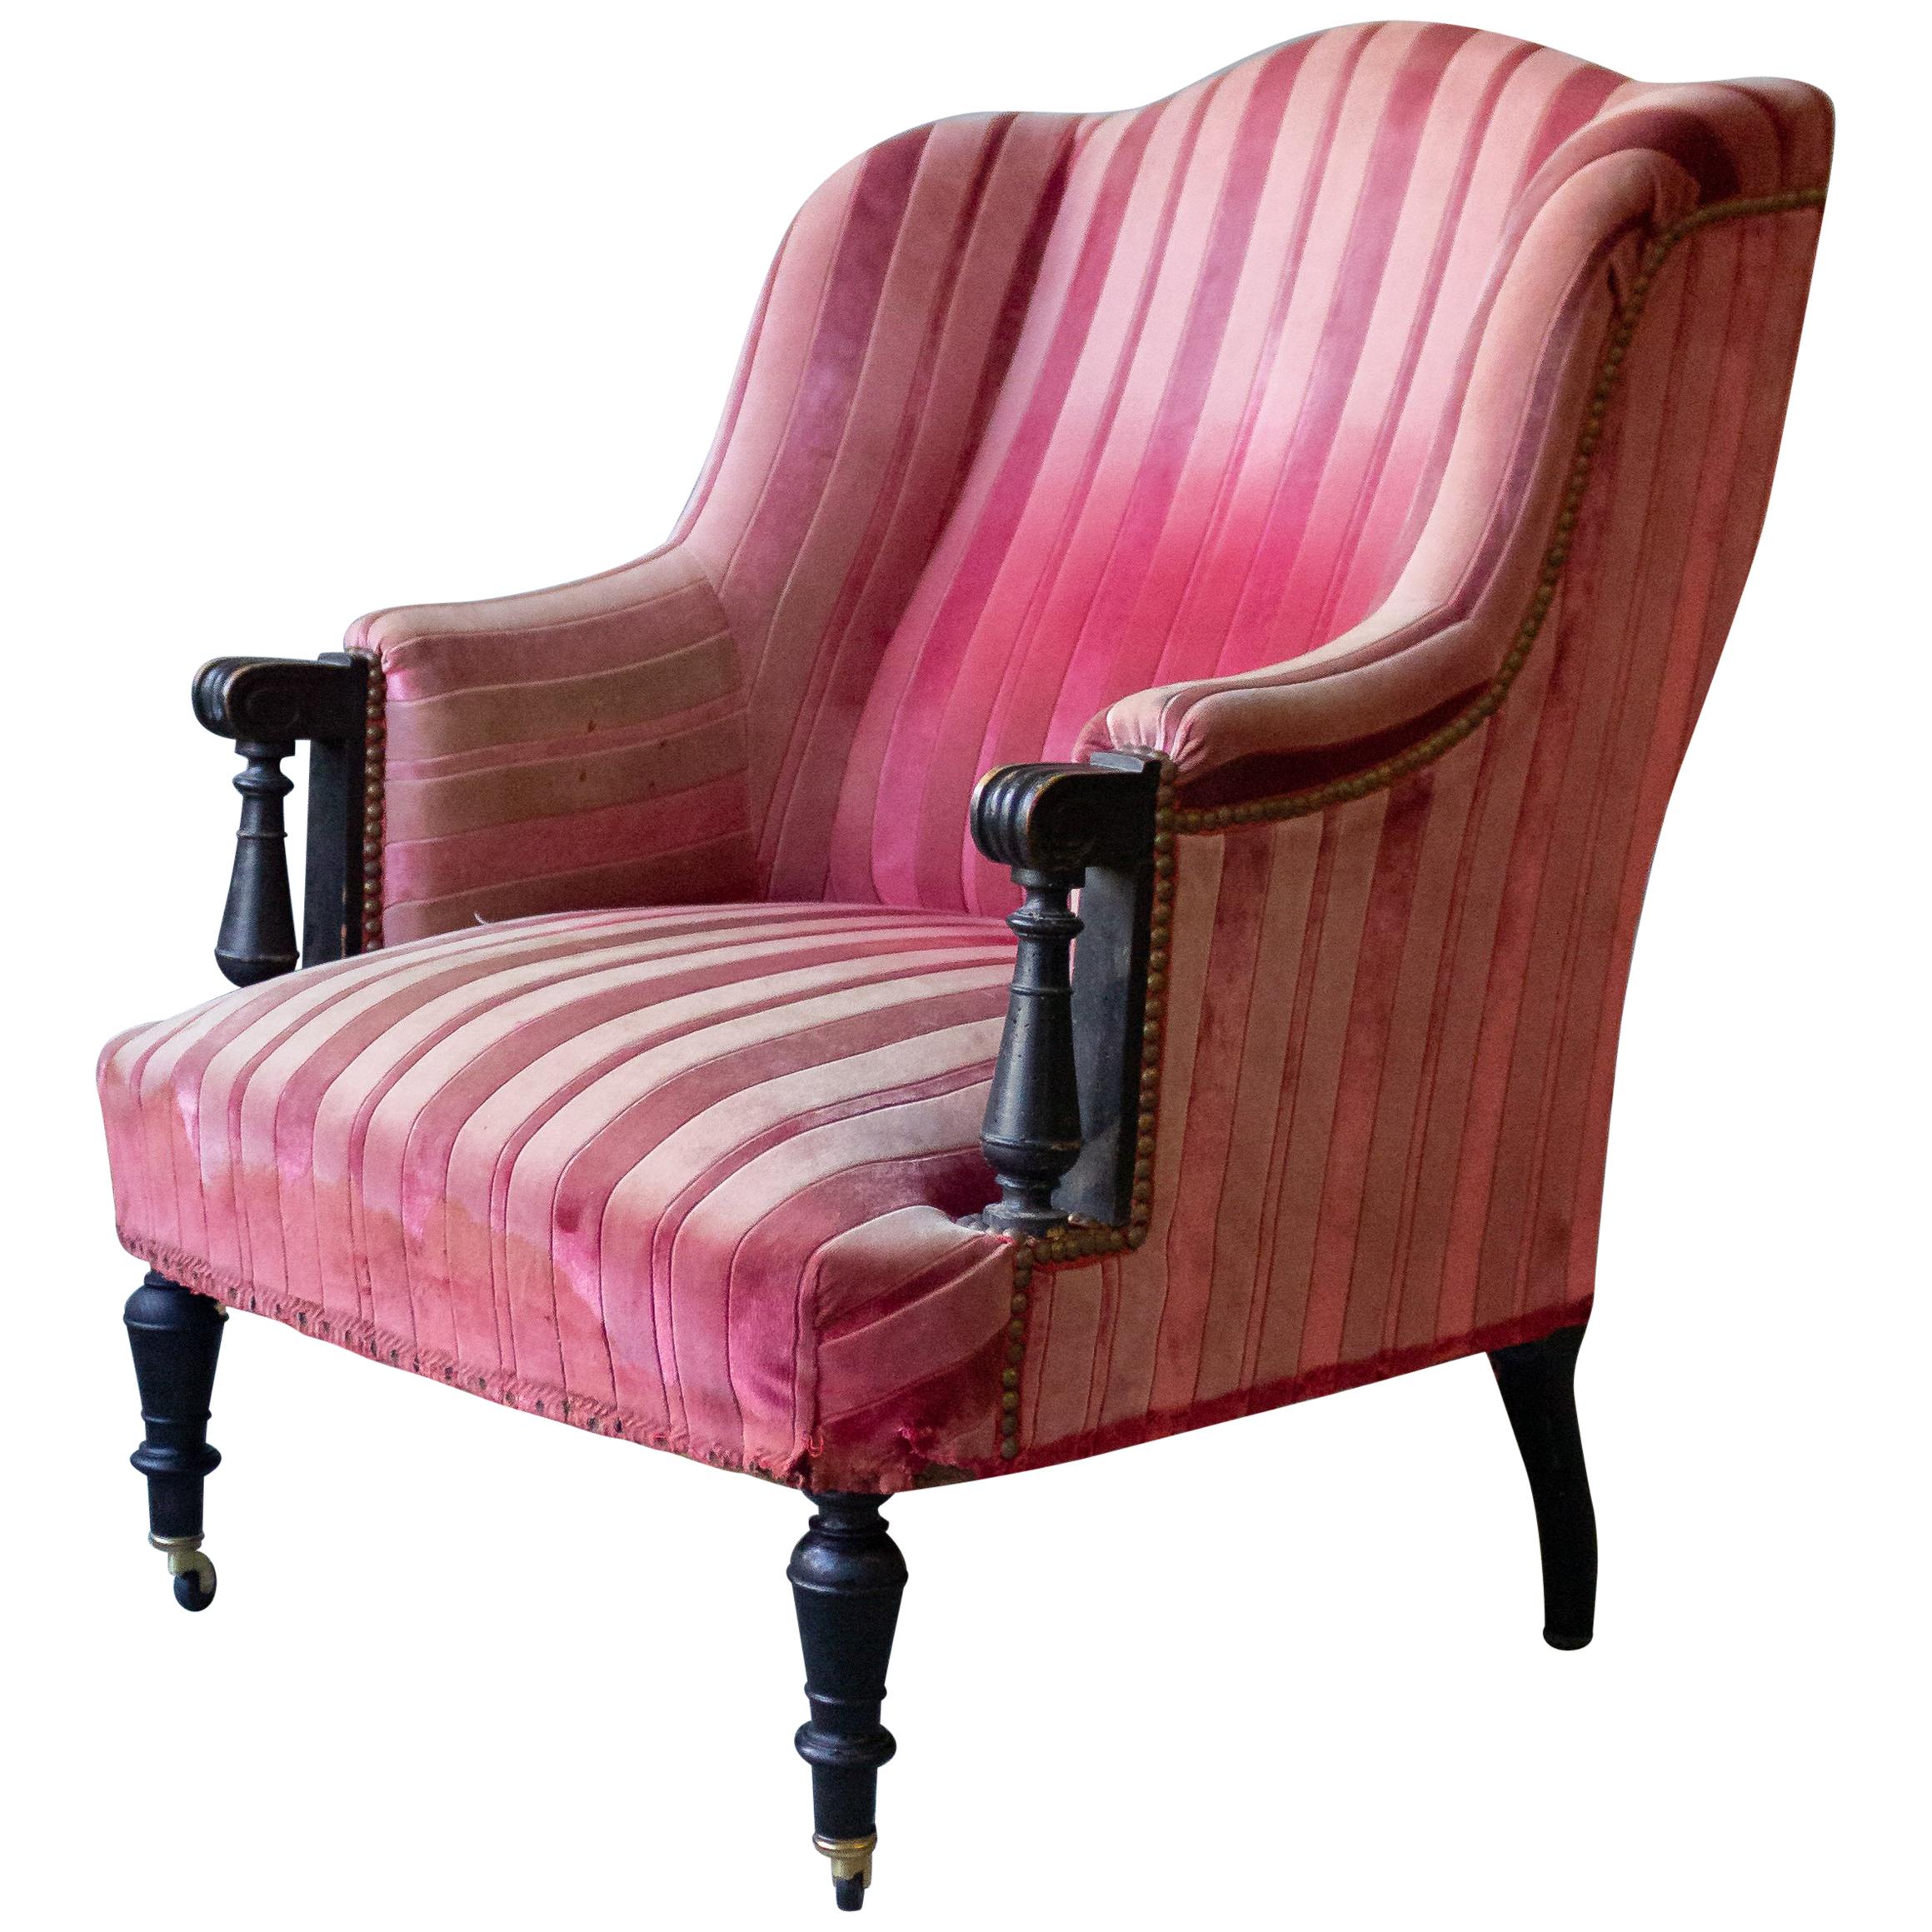 Unusual French Armchair in Faded Red Velvet